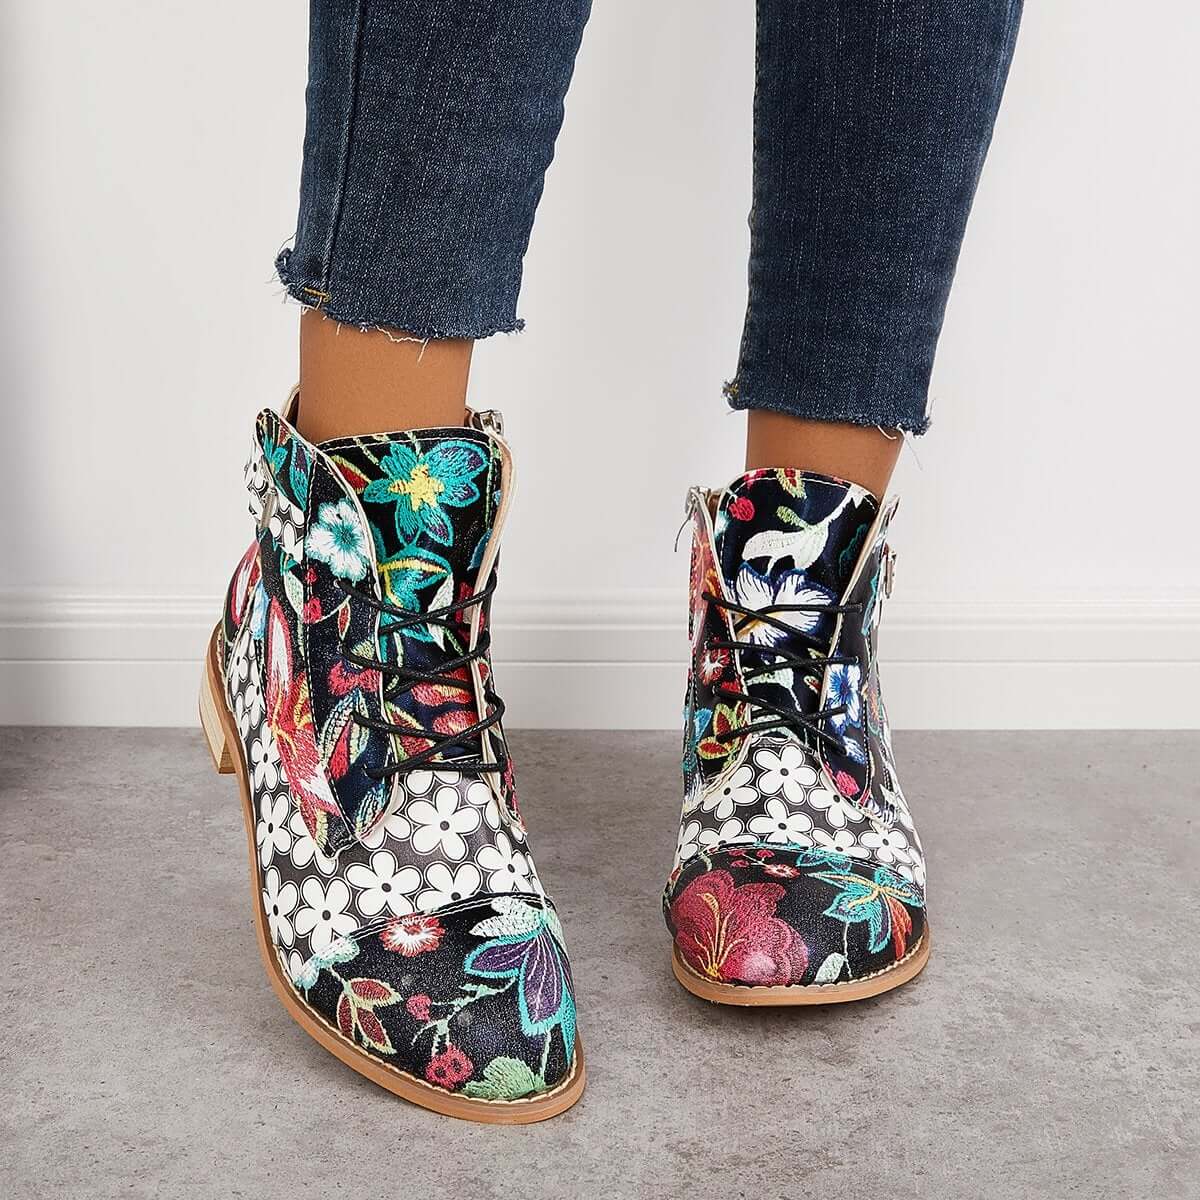 Cosylands Ink Floral Painting Western Cowboy Boots Lace Up Ankle Boots